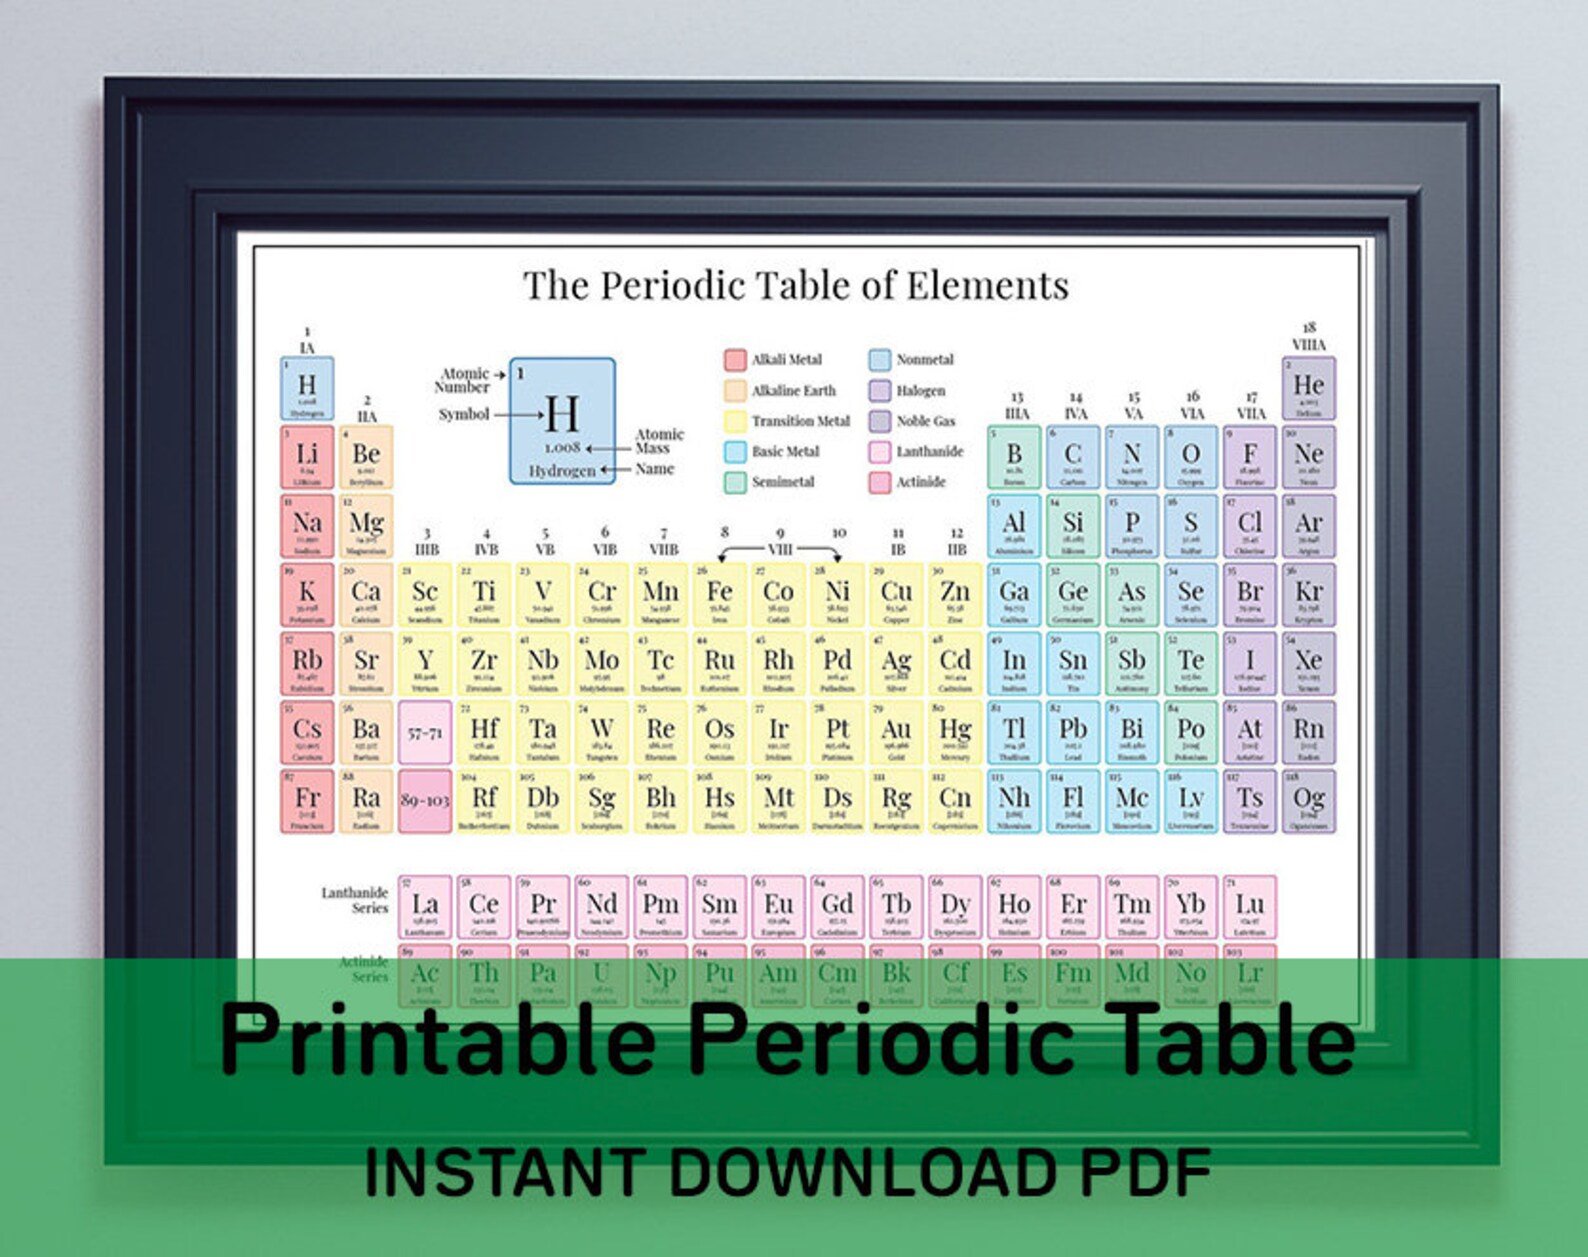 printable periodic table instant download pdf and jpg